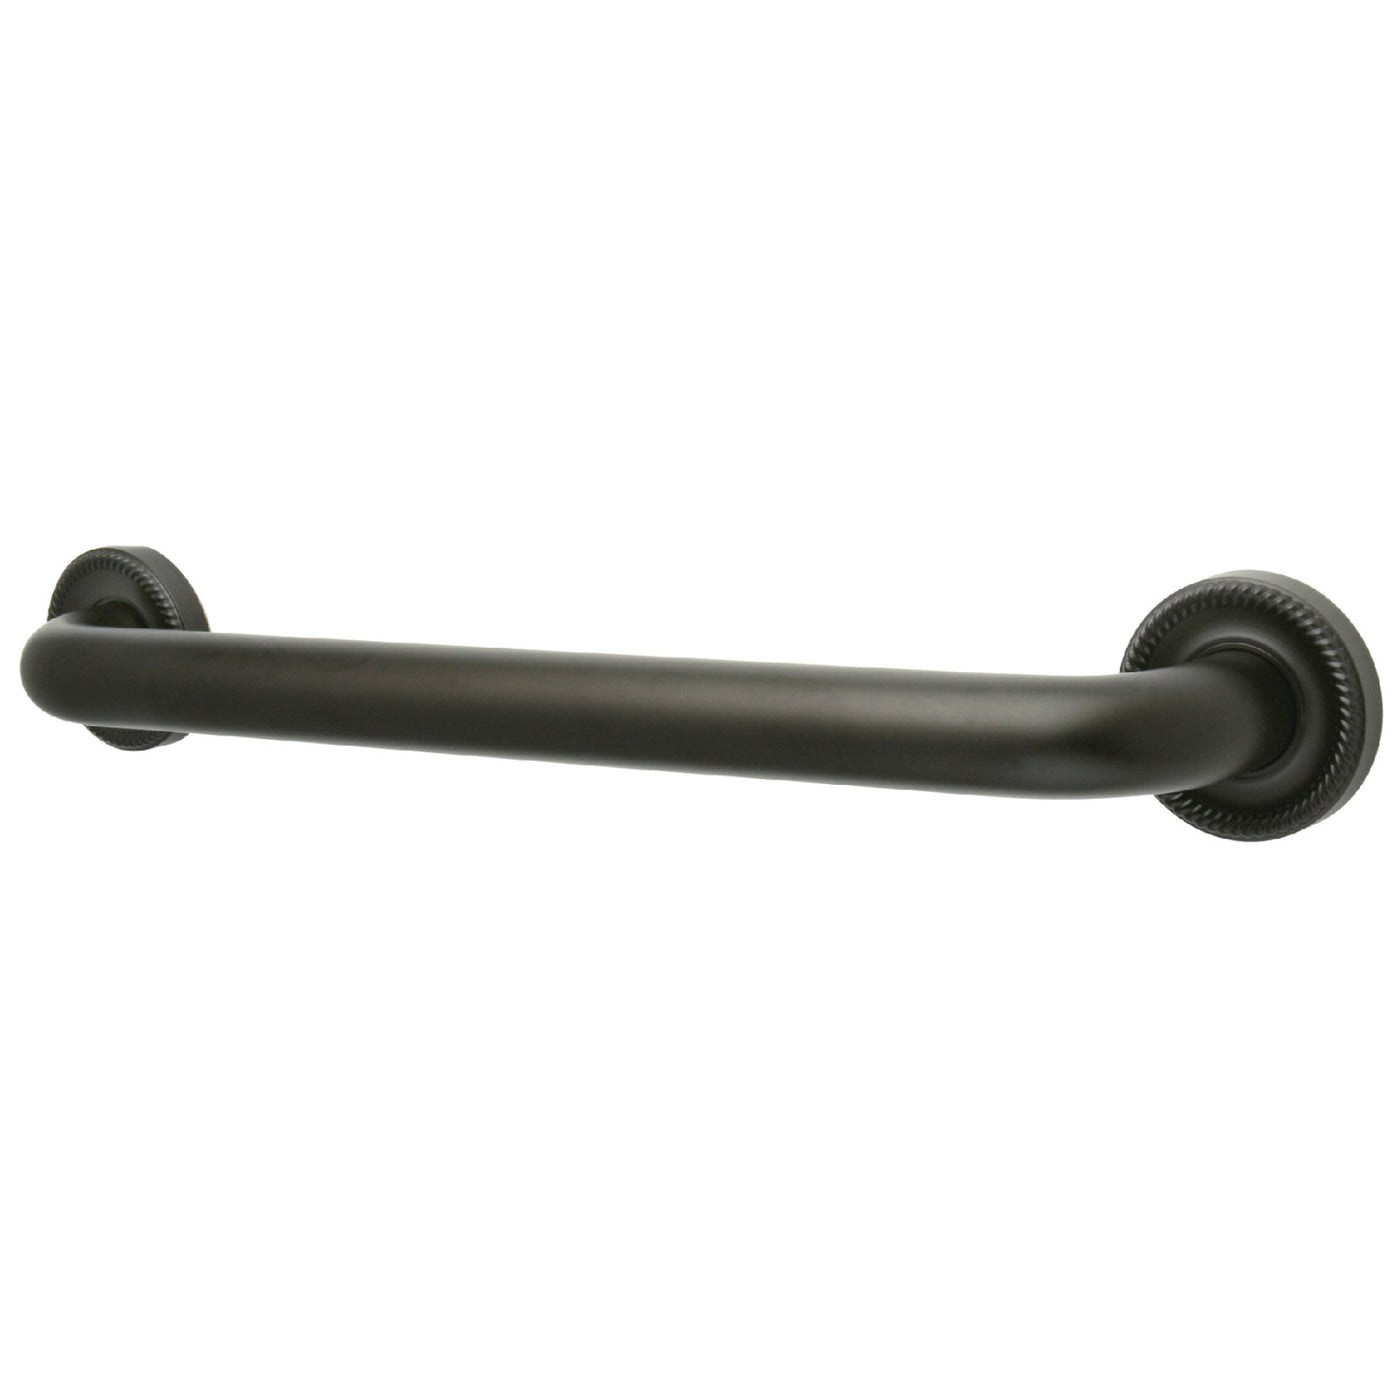 Elements of Design EDR914125 12-Inch x 1-1/4-Inch O.D Grab Bar, Oil Rubbed Bronze